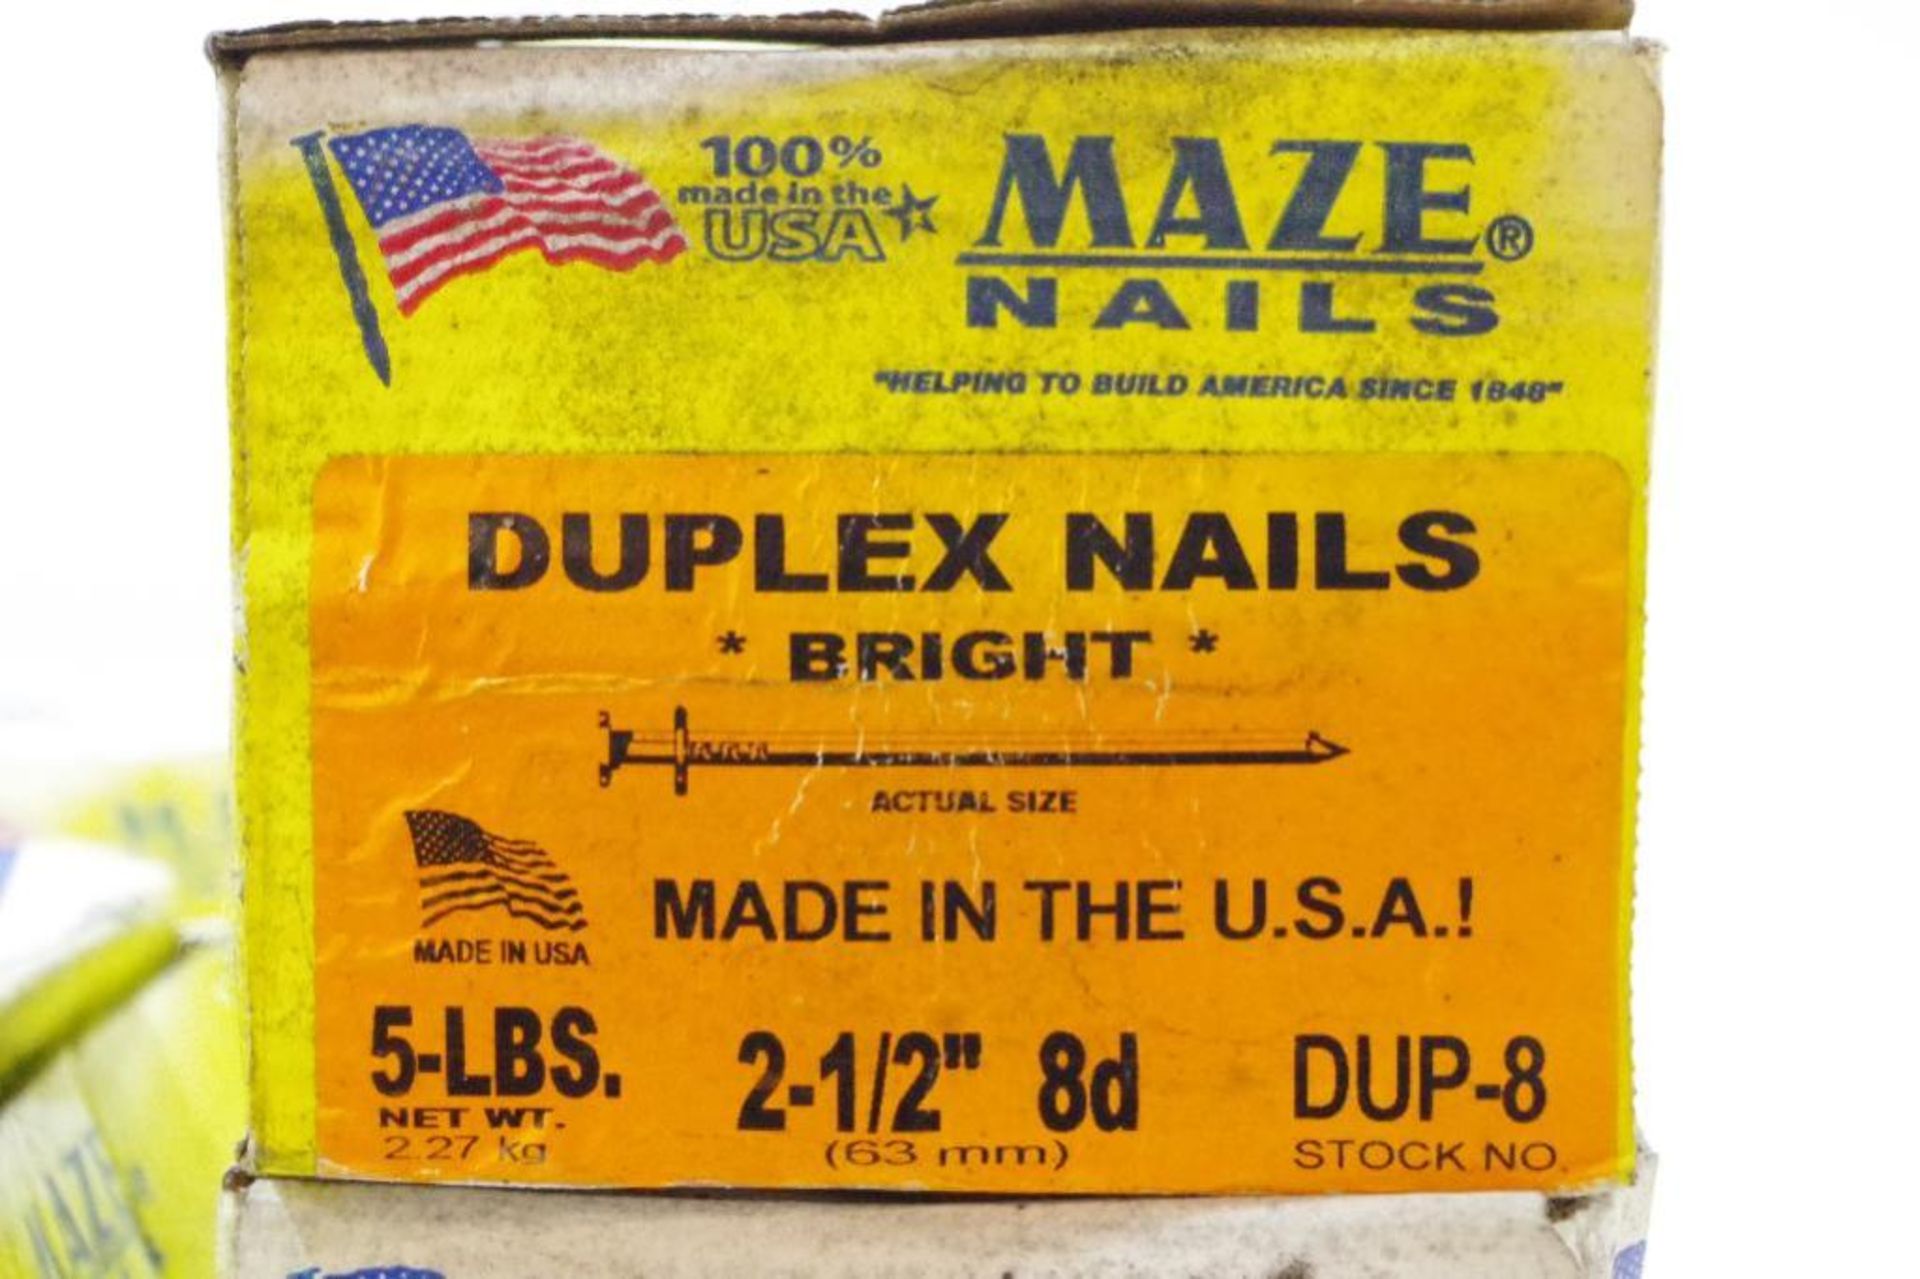 (20) Lbs. MAZE Bright Duplex Nails 2-1/2" 8d M/N DUP-8, Made in USA (4 Boxes of 5 Lbs. Each) - Image 3 of 4